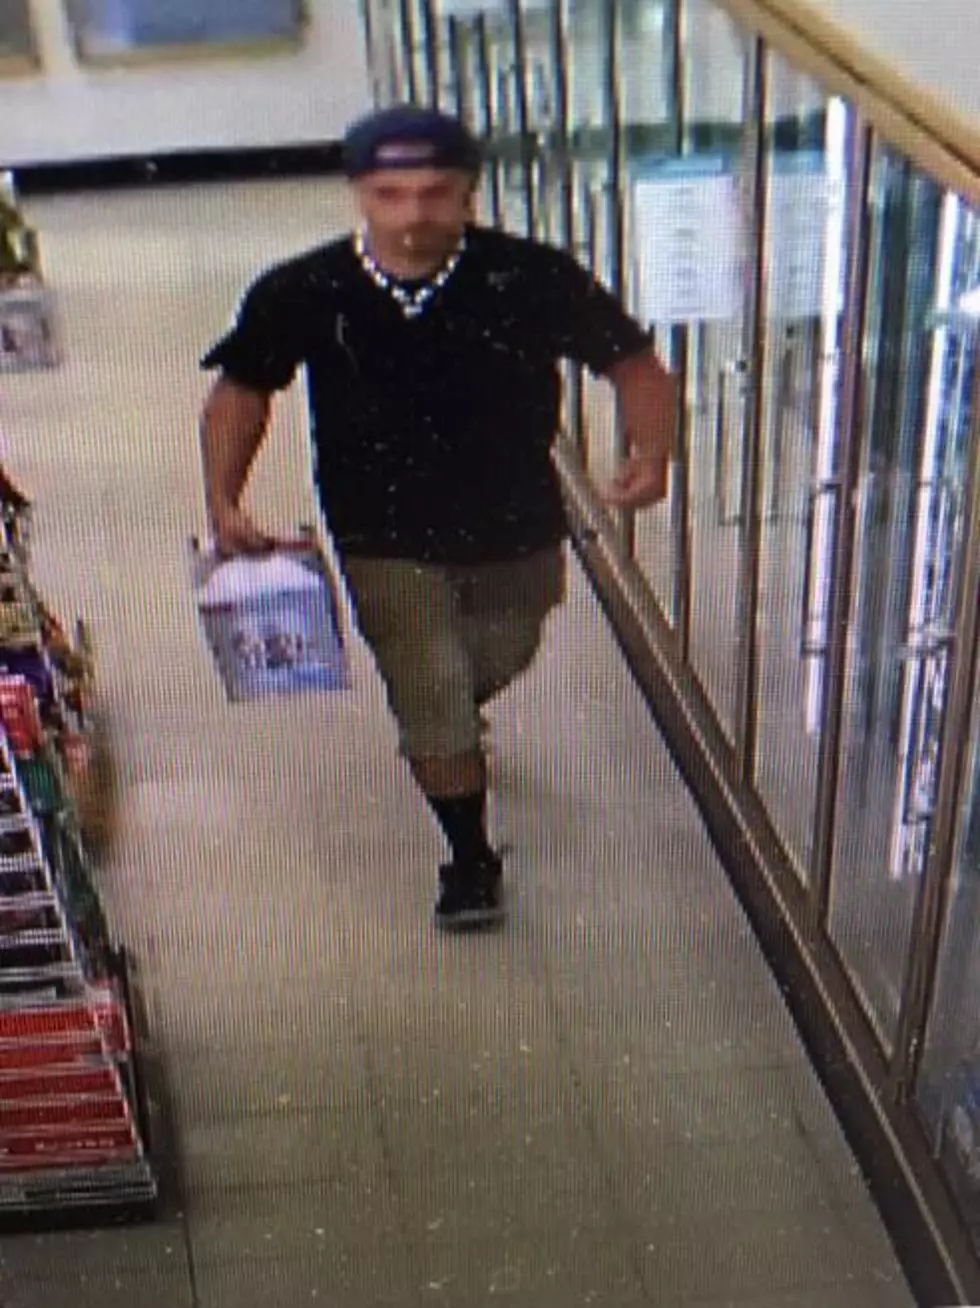 Help Richland PD Identify the Beer Run Champion of the World!